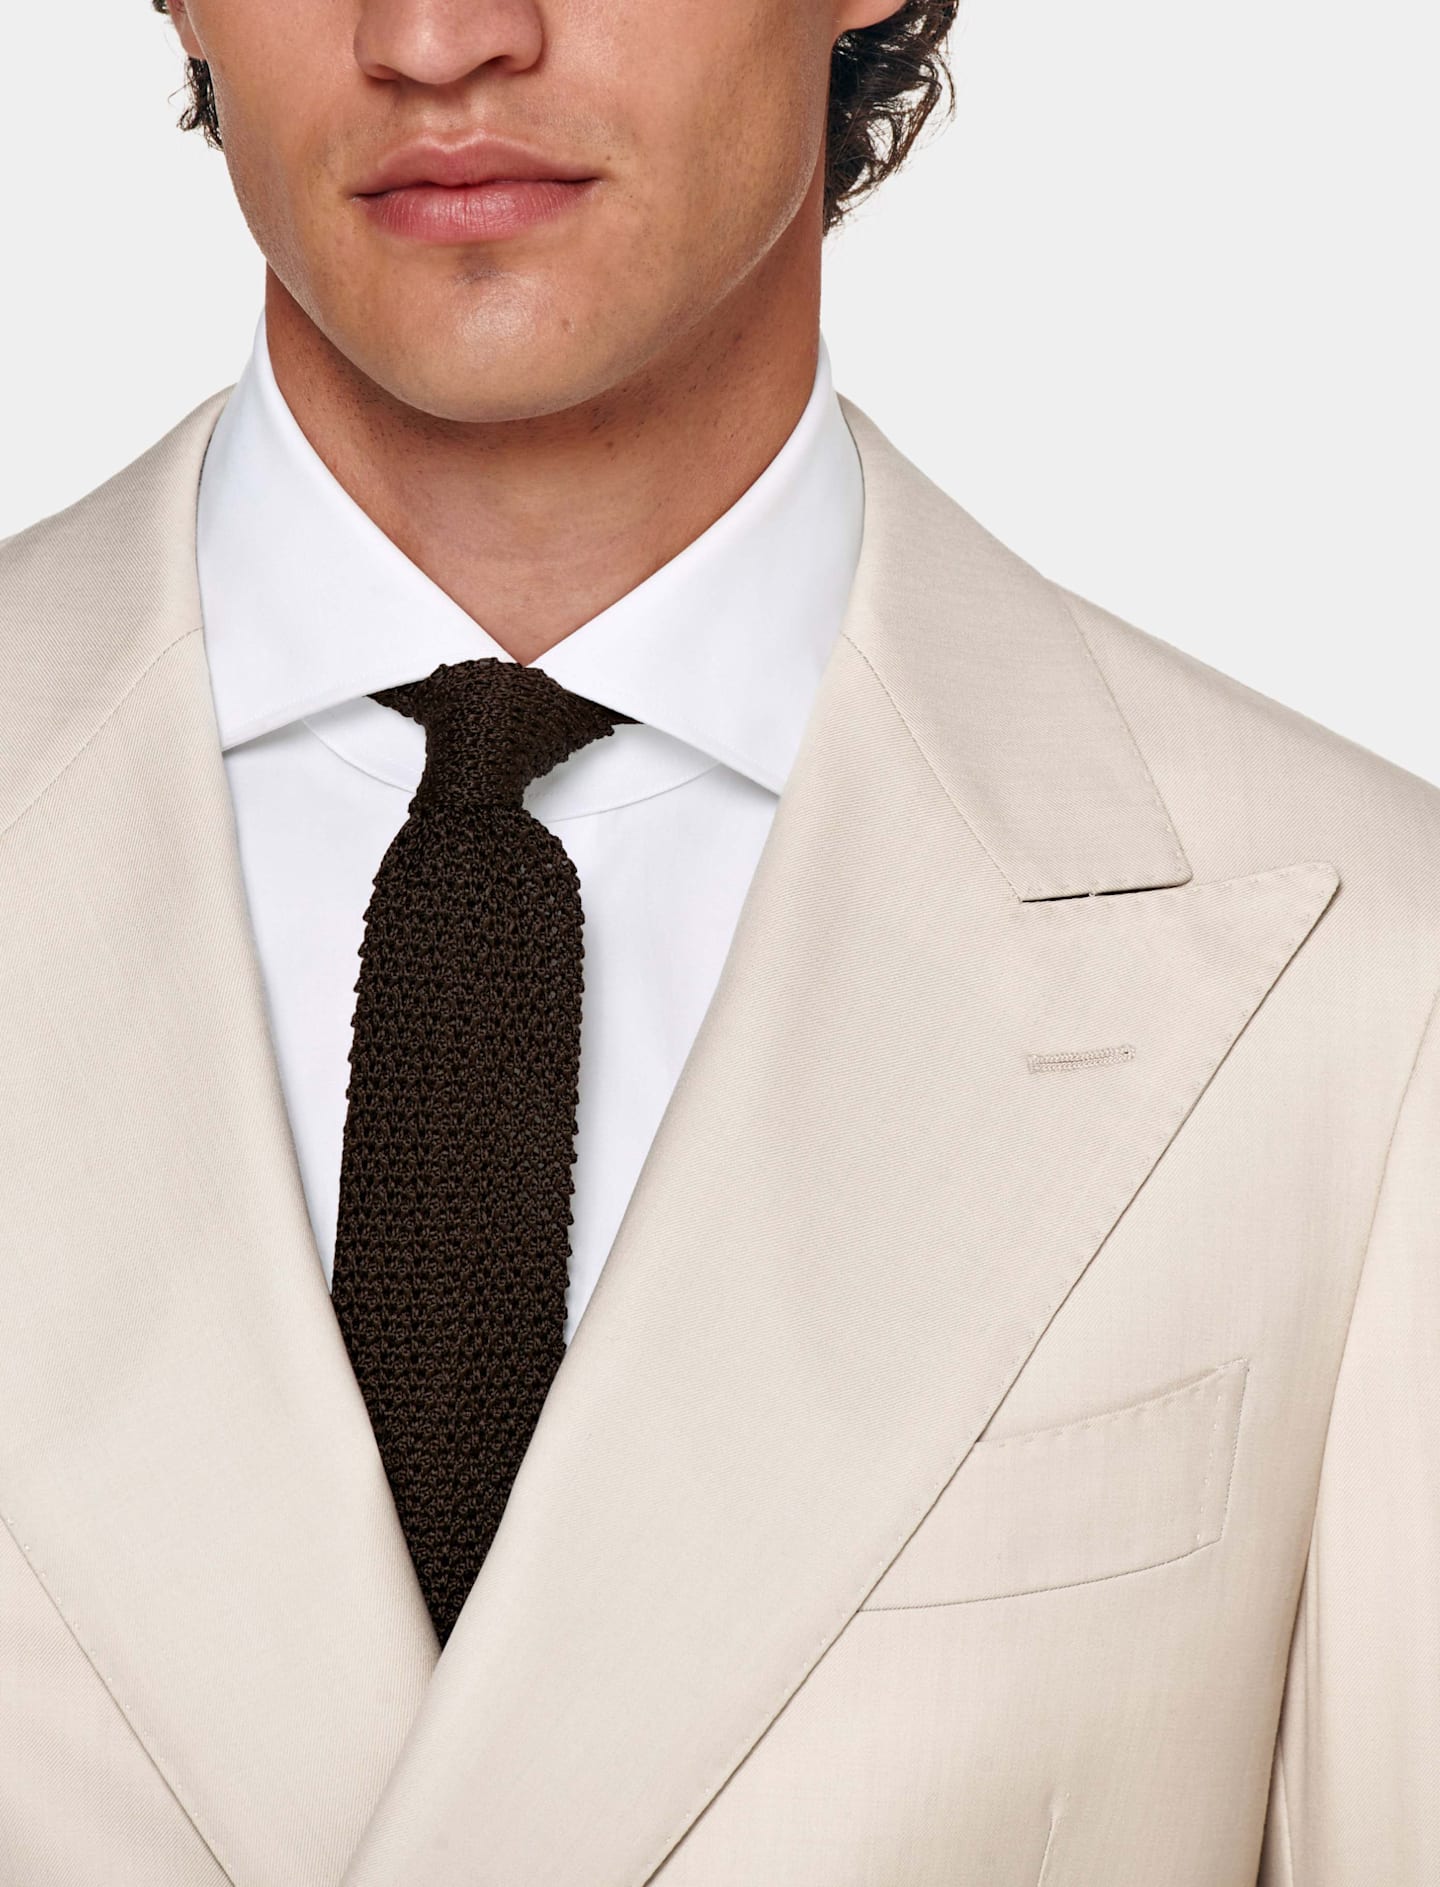 Light brown double-breasted suit and knitted tie.